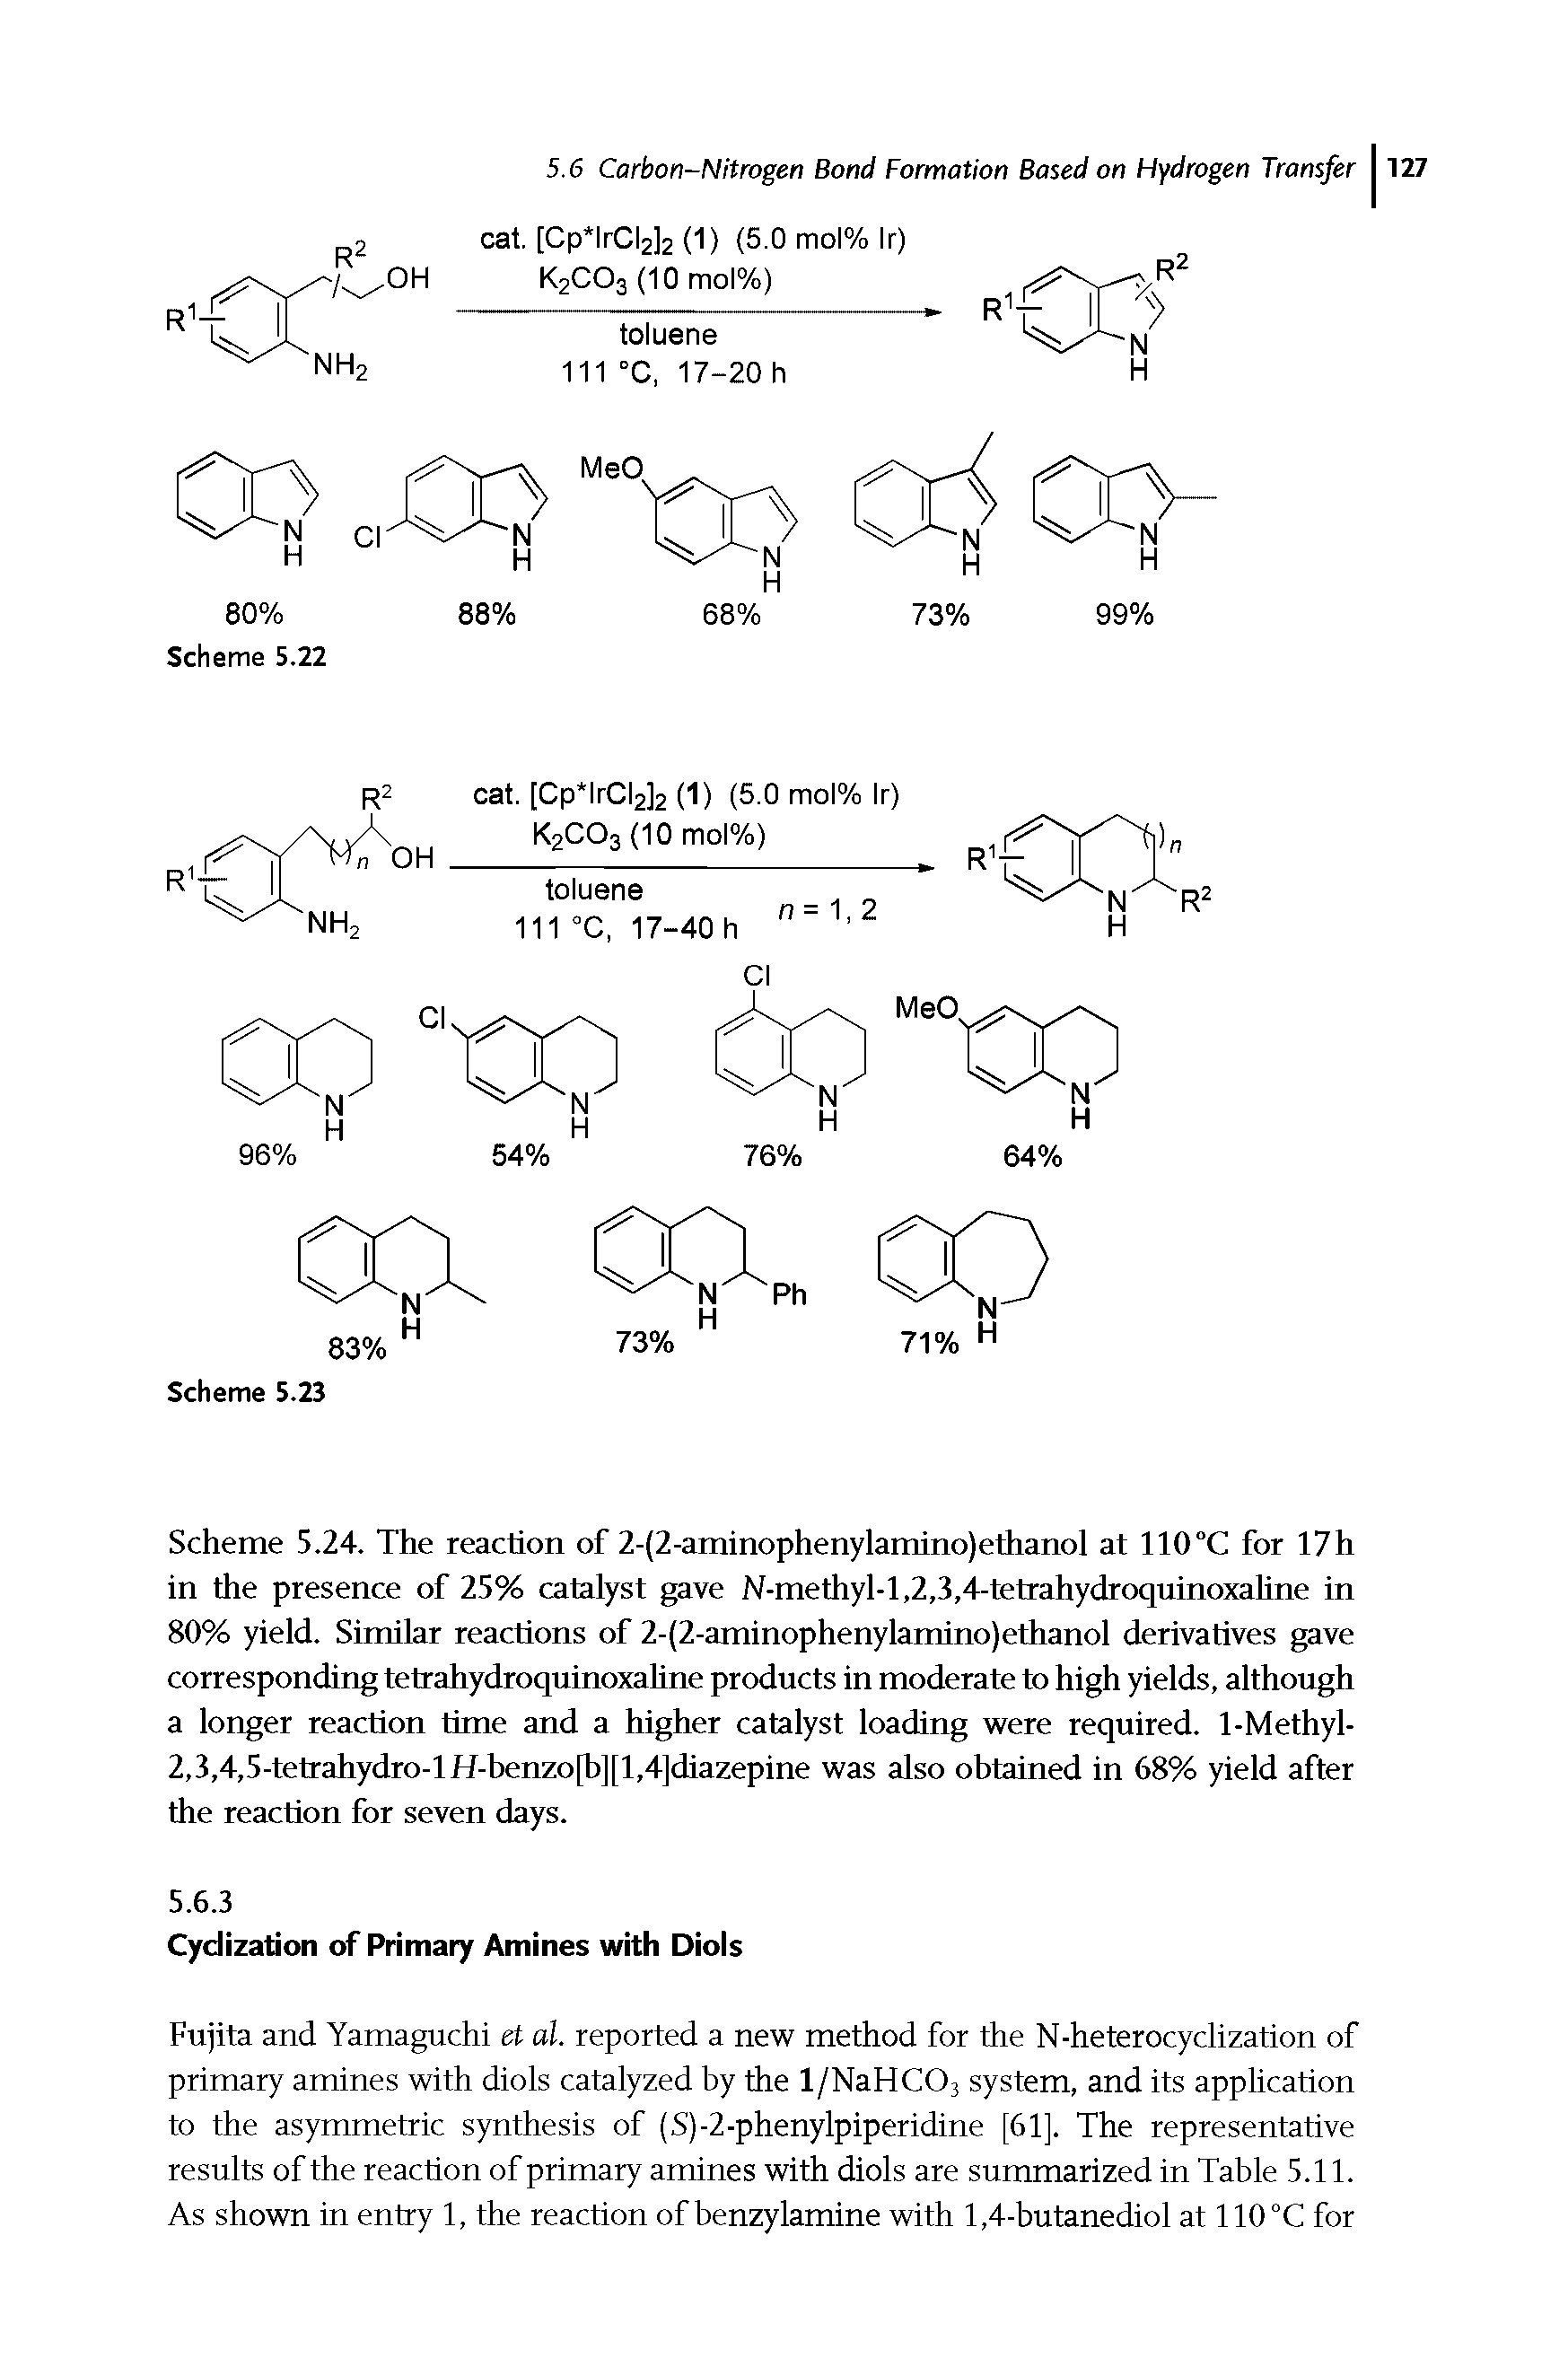 Scheme 5.24. The reaction of 2-(2-aminophenylamino)ethanol at 110°C for 17h in the presence of 25% catalyst gave N-methyl-l,2,3,4-tetrahydroquinoxaUne in 80% yield. Similar reactions of 2-(2-aminophenylamino)ethanol derivatives gave corresponding tetrahydroquinoxaUne products in moderate to high yields, although a longer reaction time and a higher catalyst loading were required. 1-Methyl-2,3,4,5-tetrahydro-lH-benzo[b][l,4]diazepine was also obtained in 68% yield after the reaction for seven days.